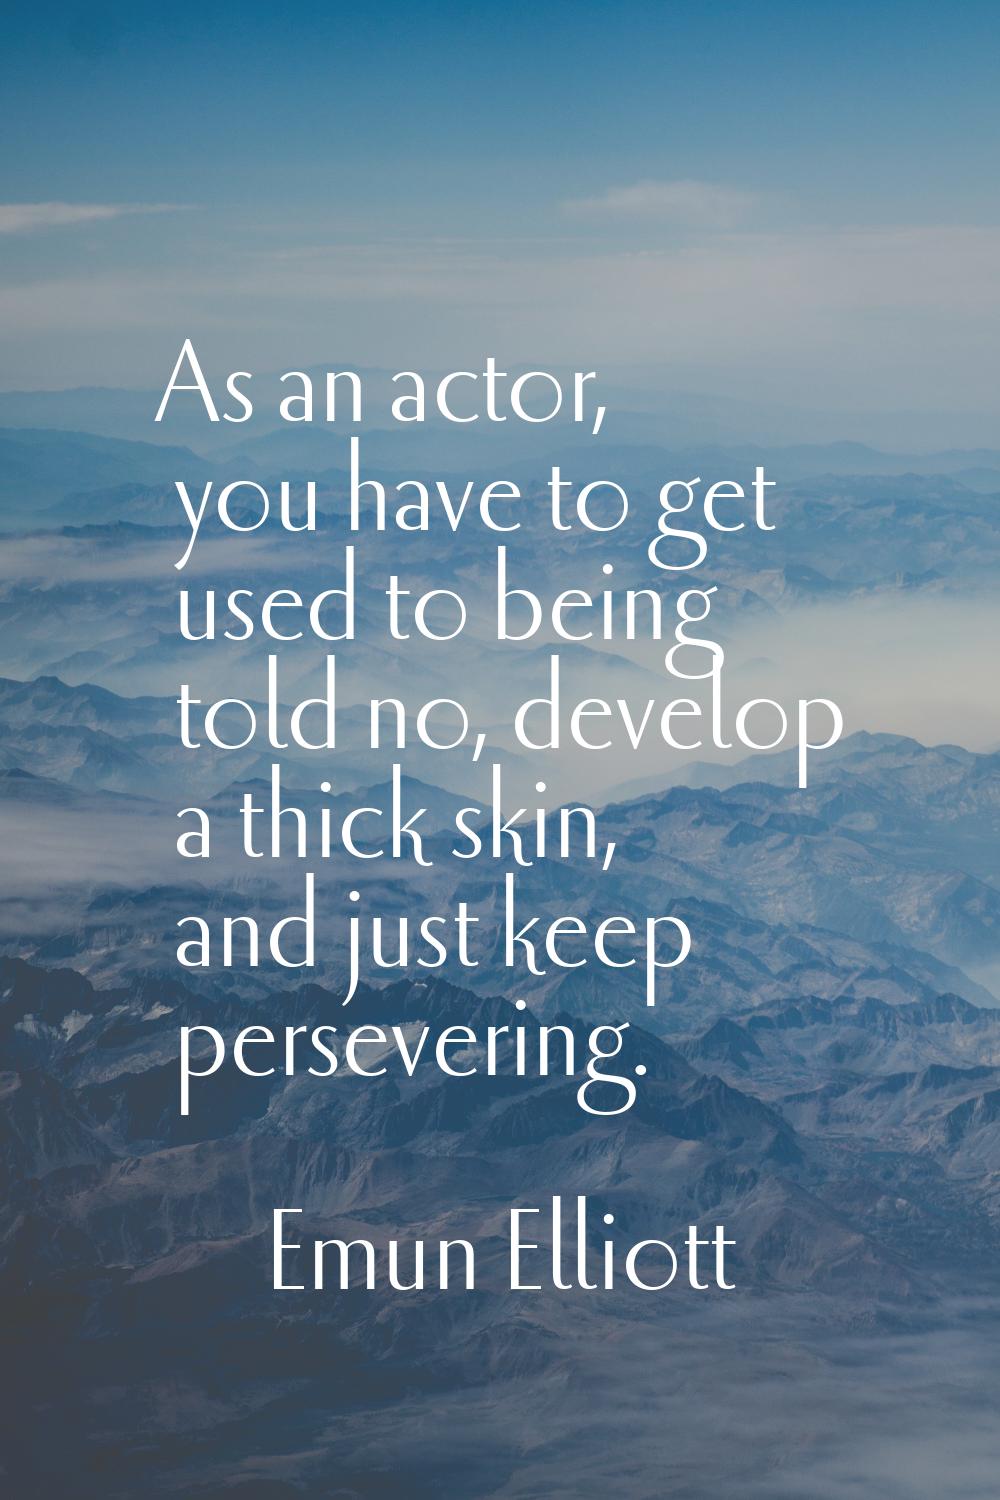 As an actor, you have to get used to being told no, develop a thick skin, and just keep persevering